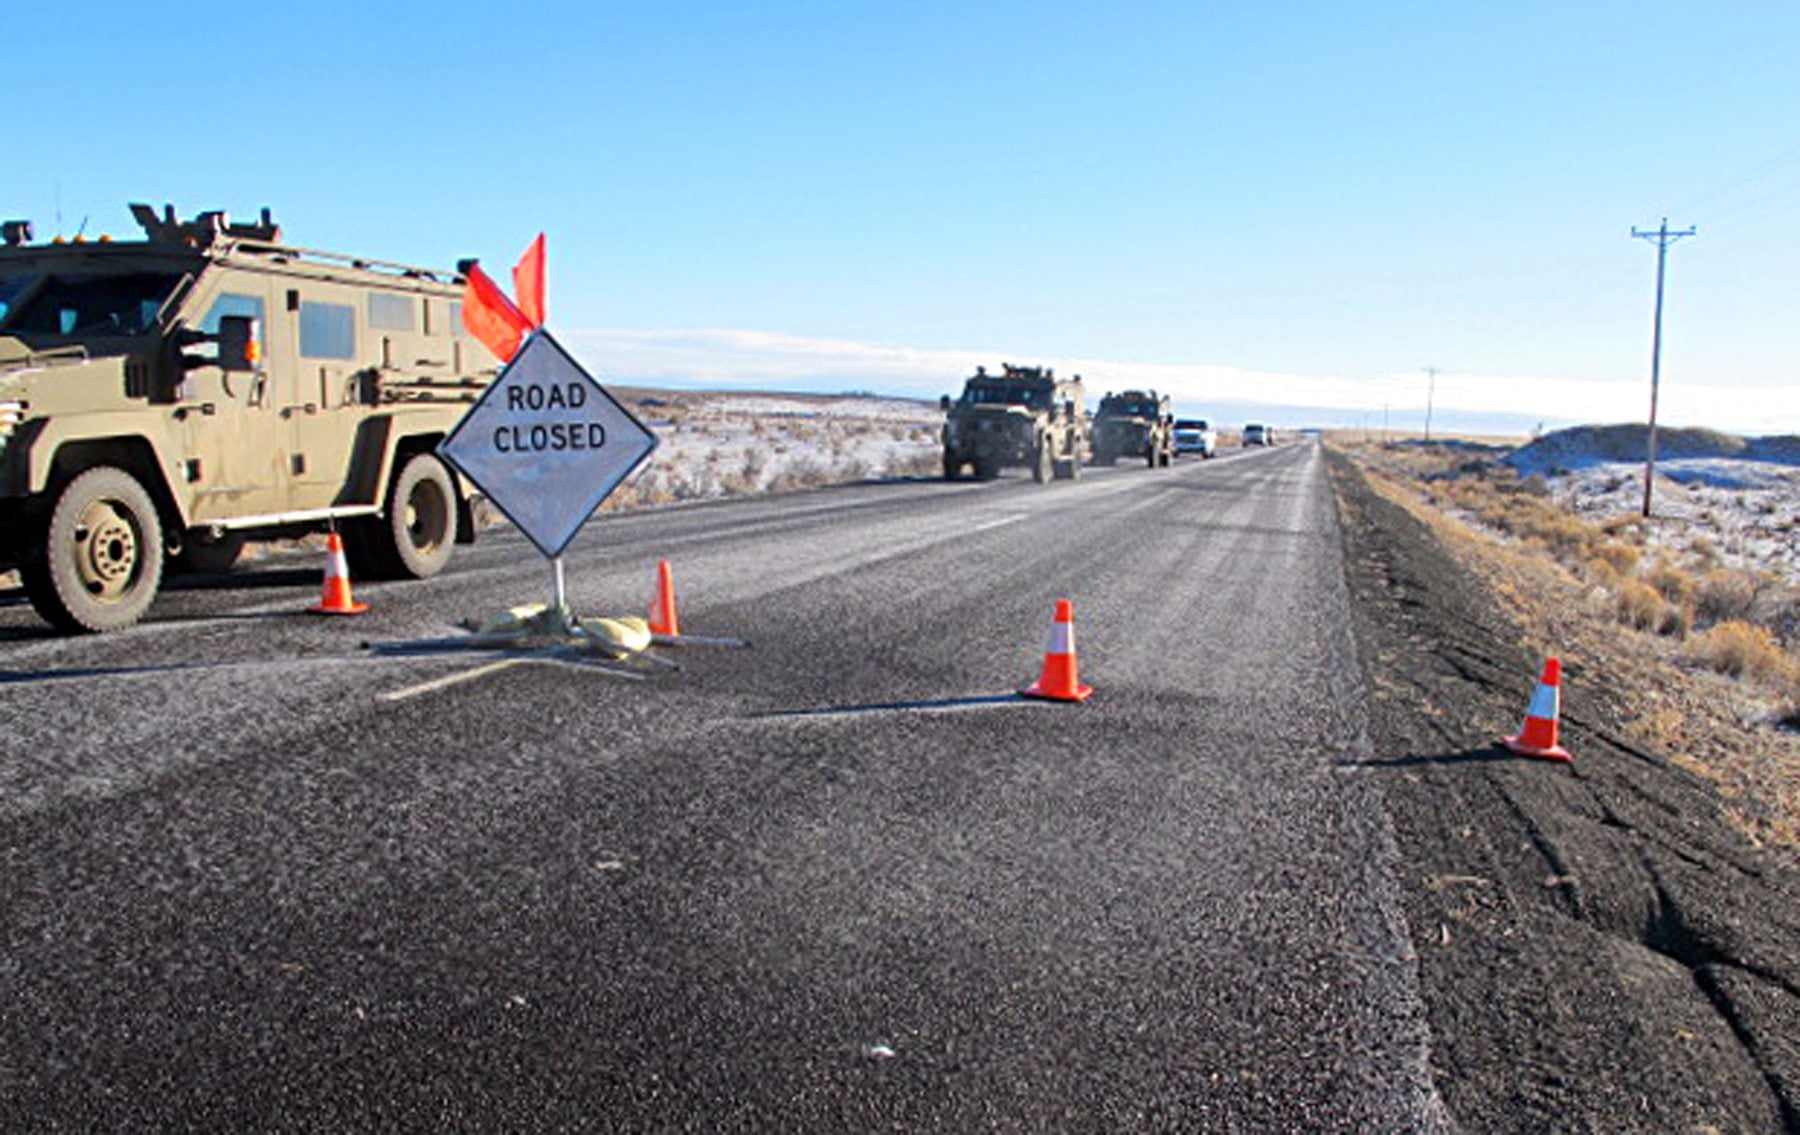 A convoy of armored vehicles and SUVs rolls past a barricade on the road near the Malheur National Wildlife Refuge near Burns, Ore., Saturday, Jan. 30, 2016. The remnants of an armed group occupying the refuge to protest federal land policies say they won't leave until they get assurances they won't be arrested.(AP Photo/Nicholas K.